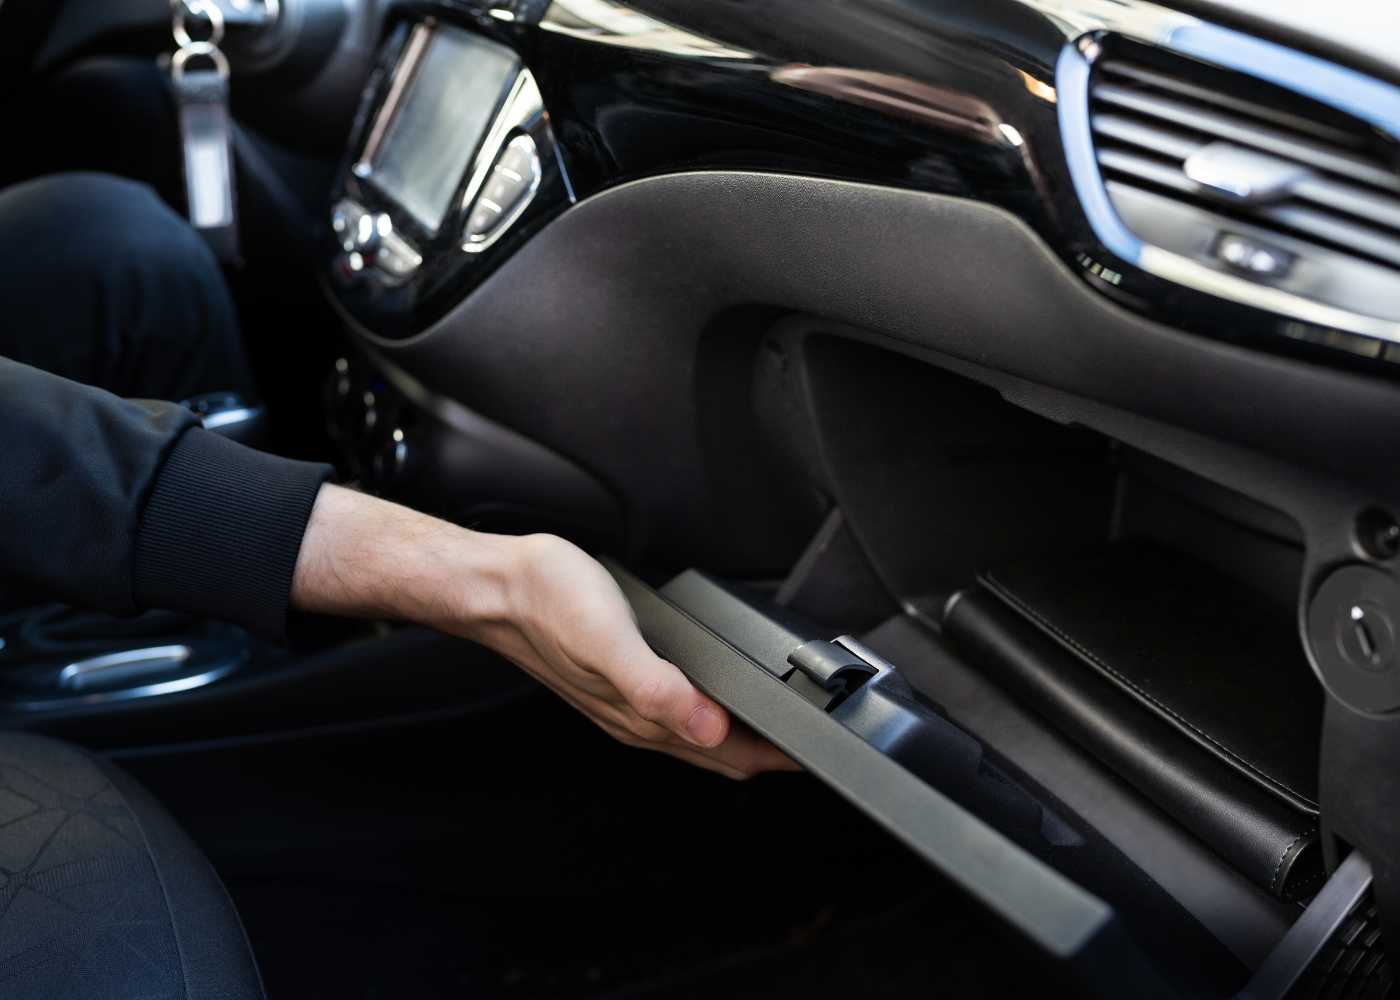 How to open glove compartment tesla